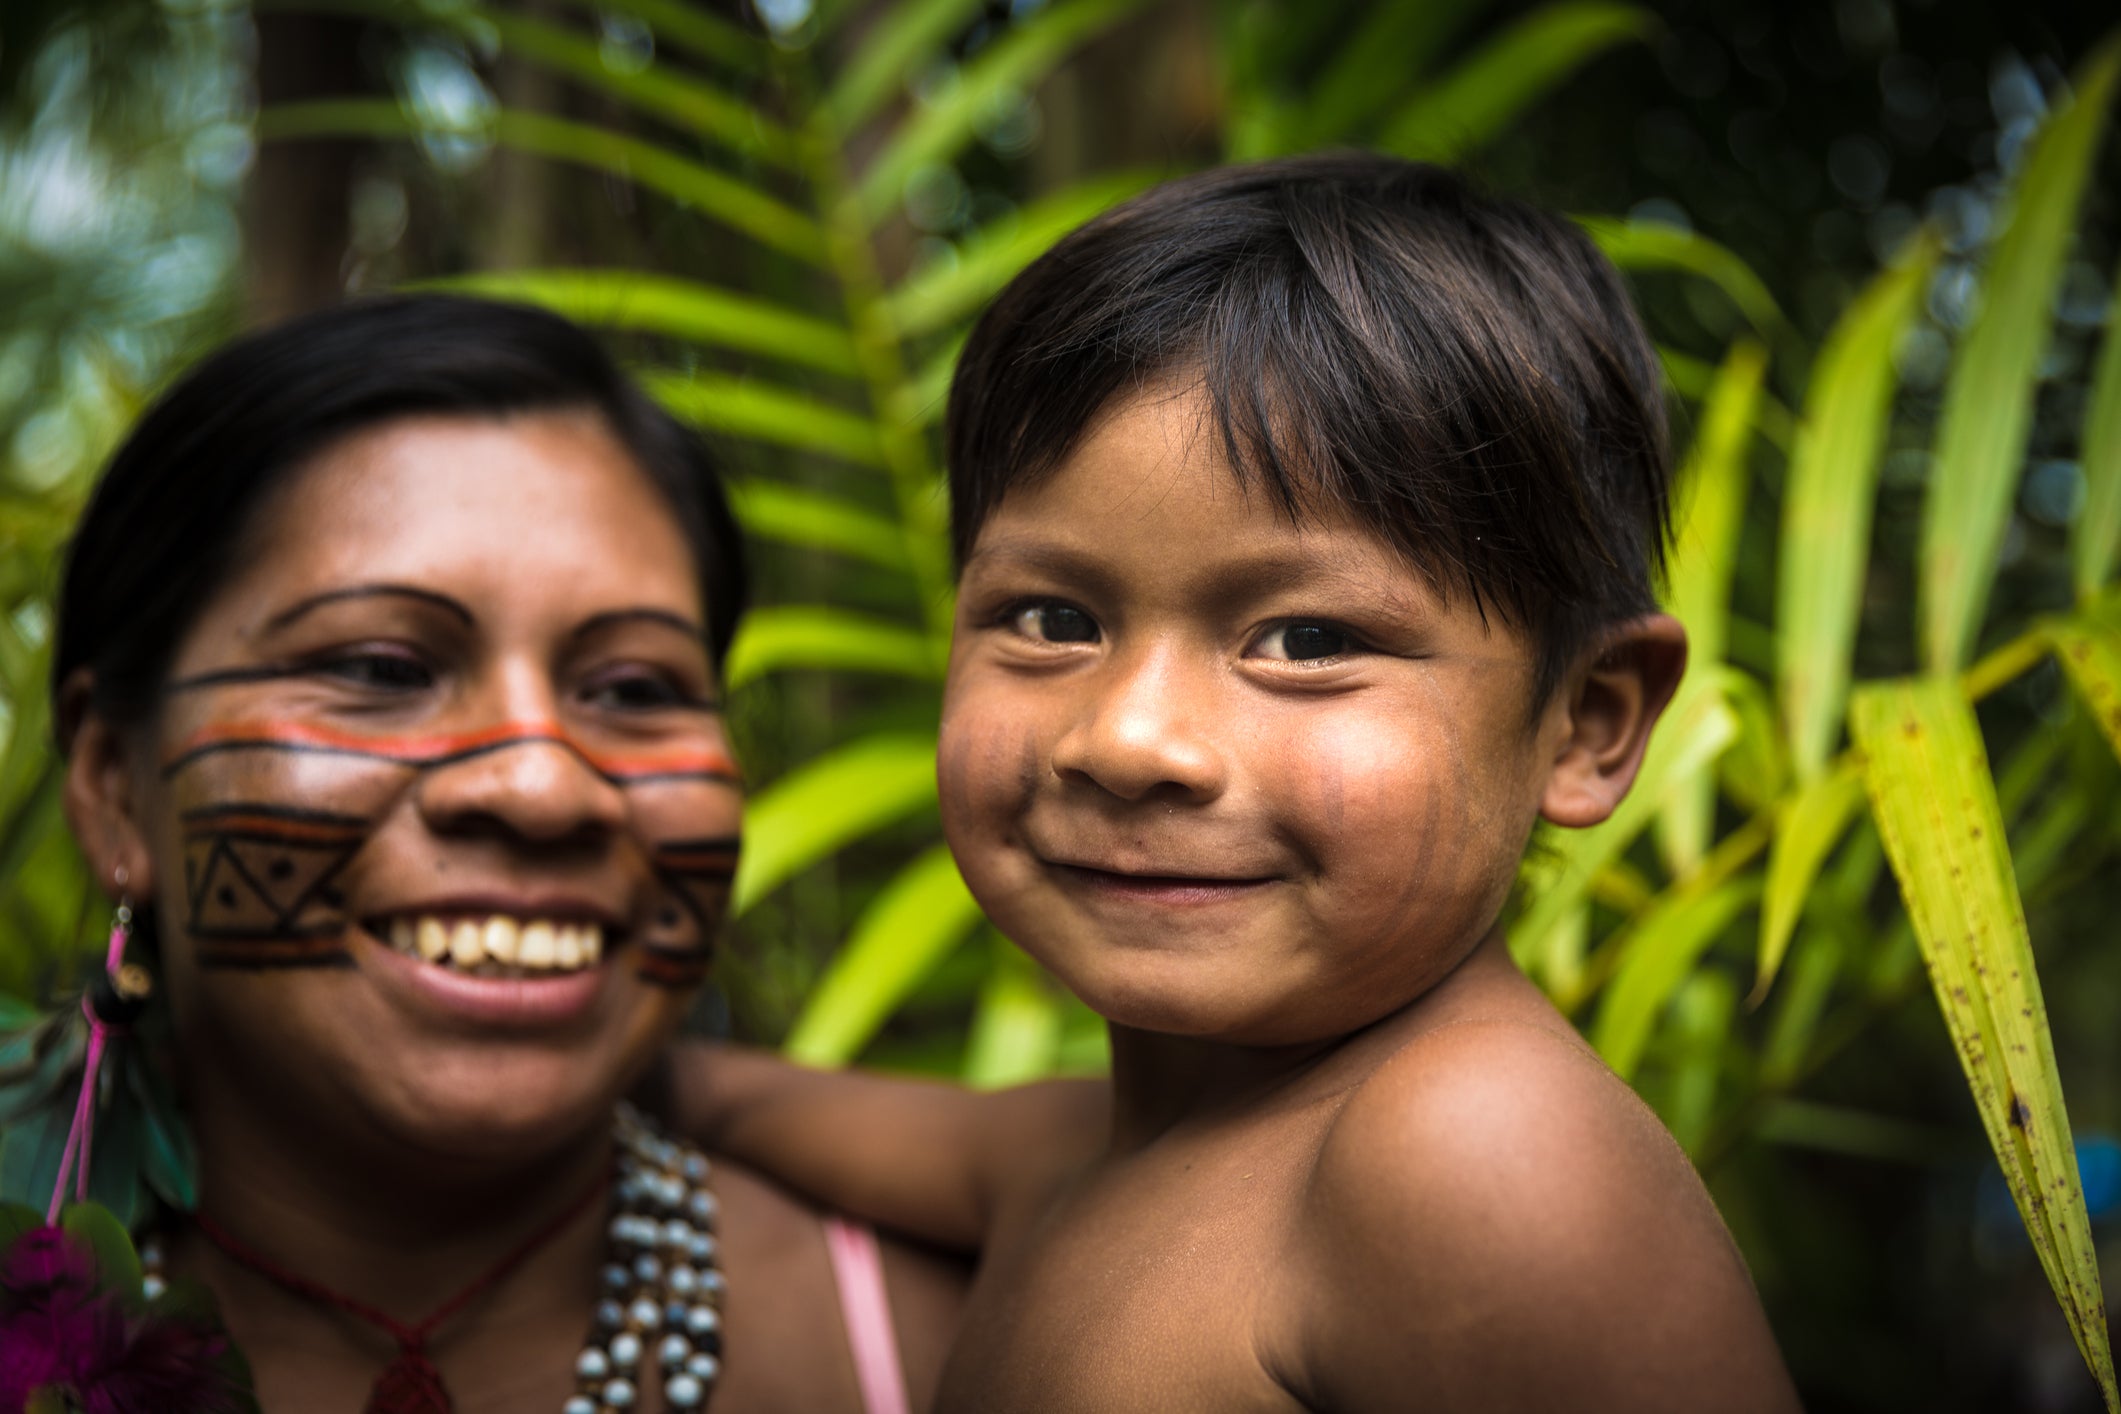 Mother and child from Brazil’s Tupi Guarani tribe